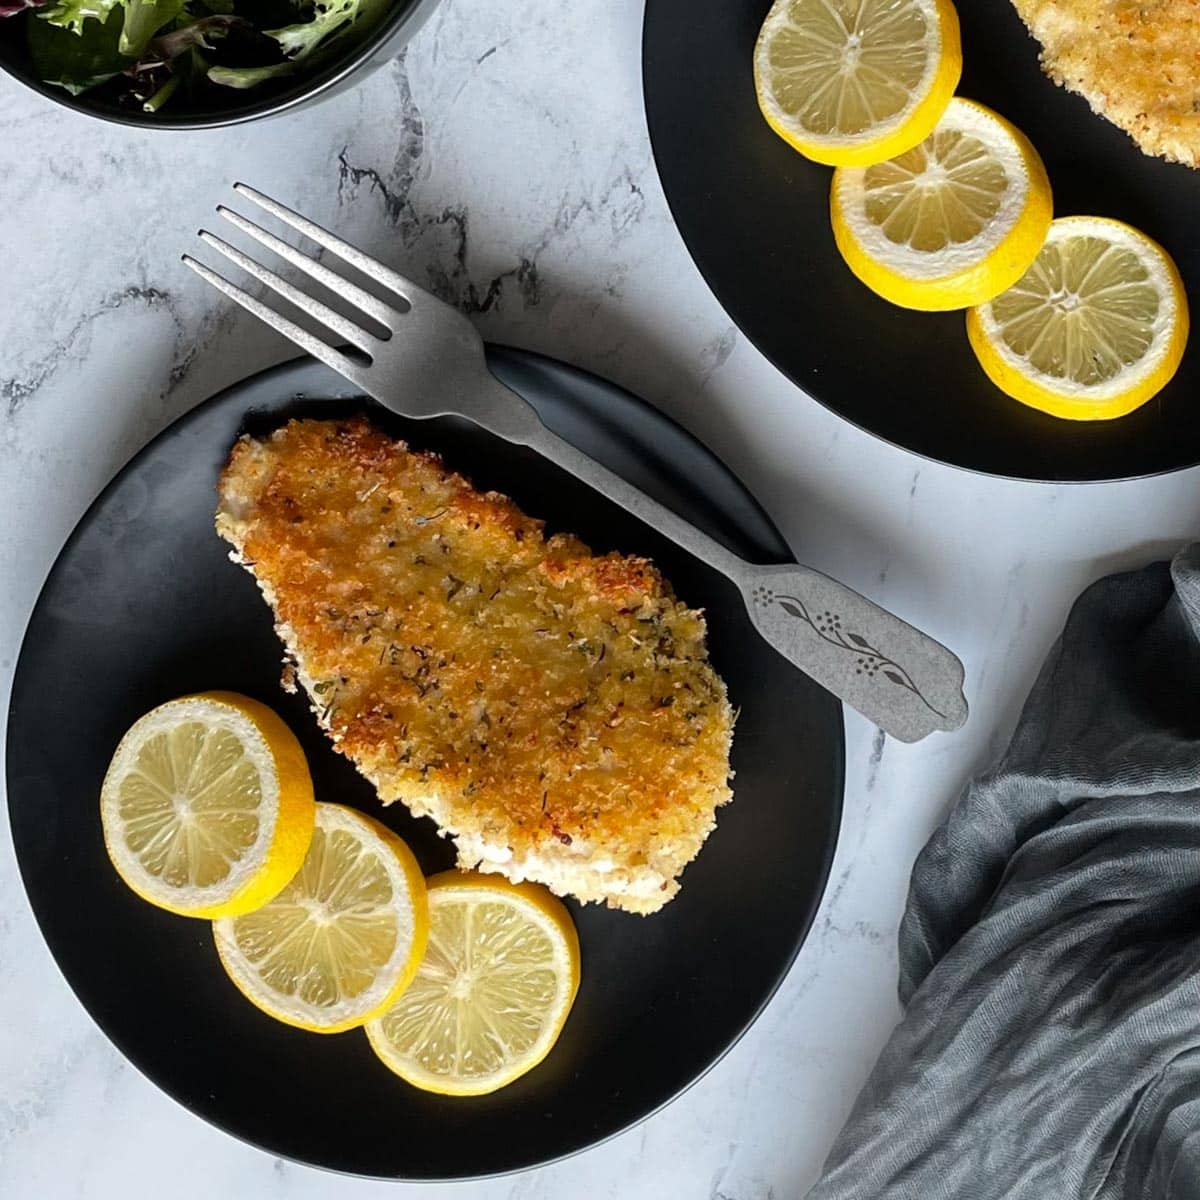 A fried, breaded chicken cutlet with three lemon slices on a black plate on a white marble counter.